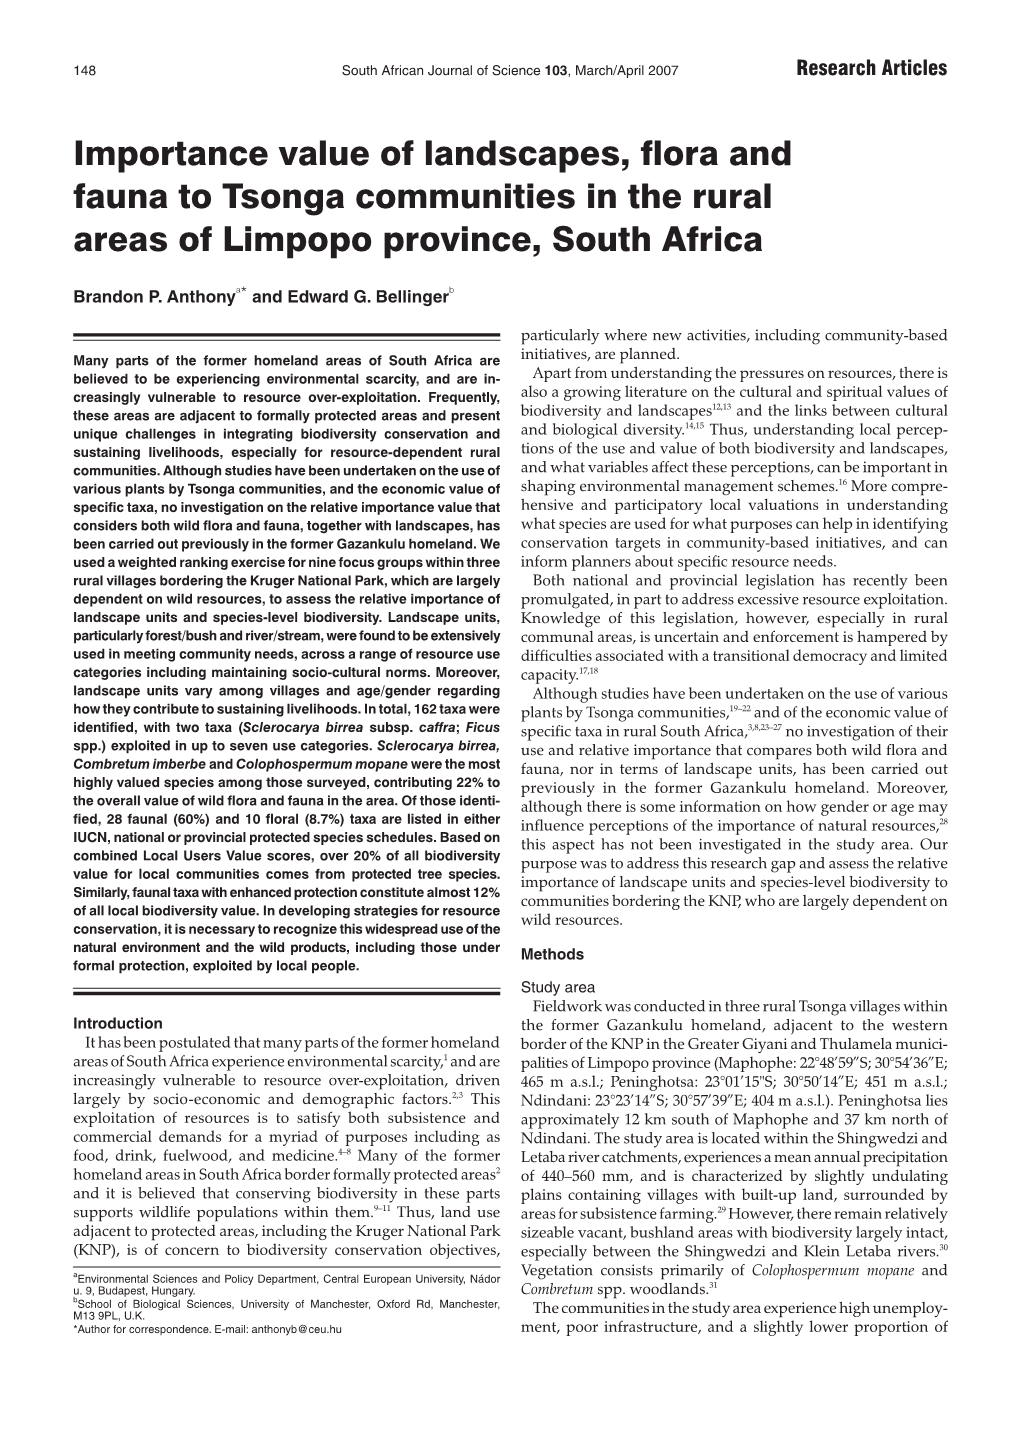 Importance Value of Landscapes, Flora and Fauna to Tsonga Communities in the Rural Areas of Limpopo Province, South Africa